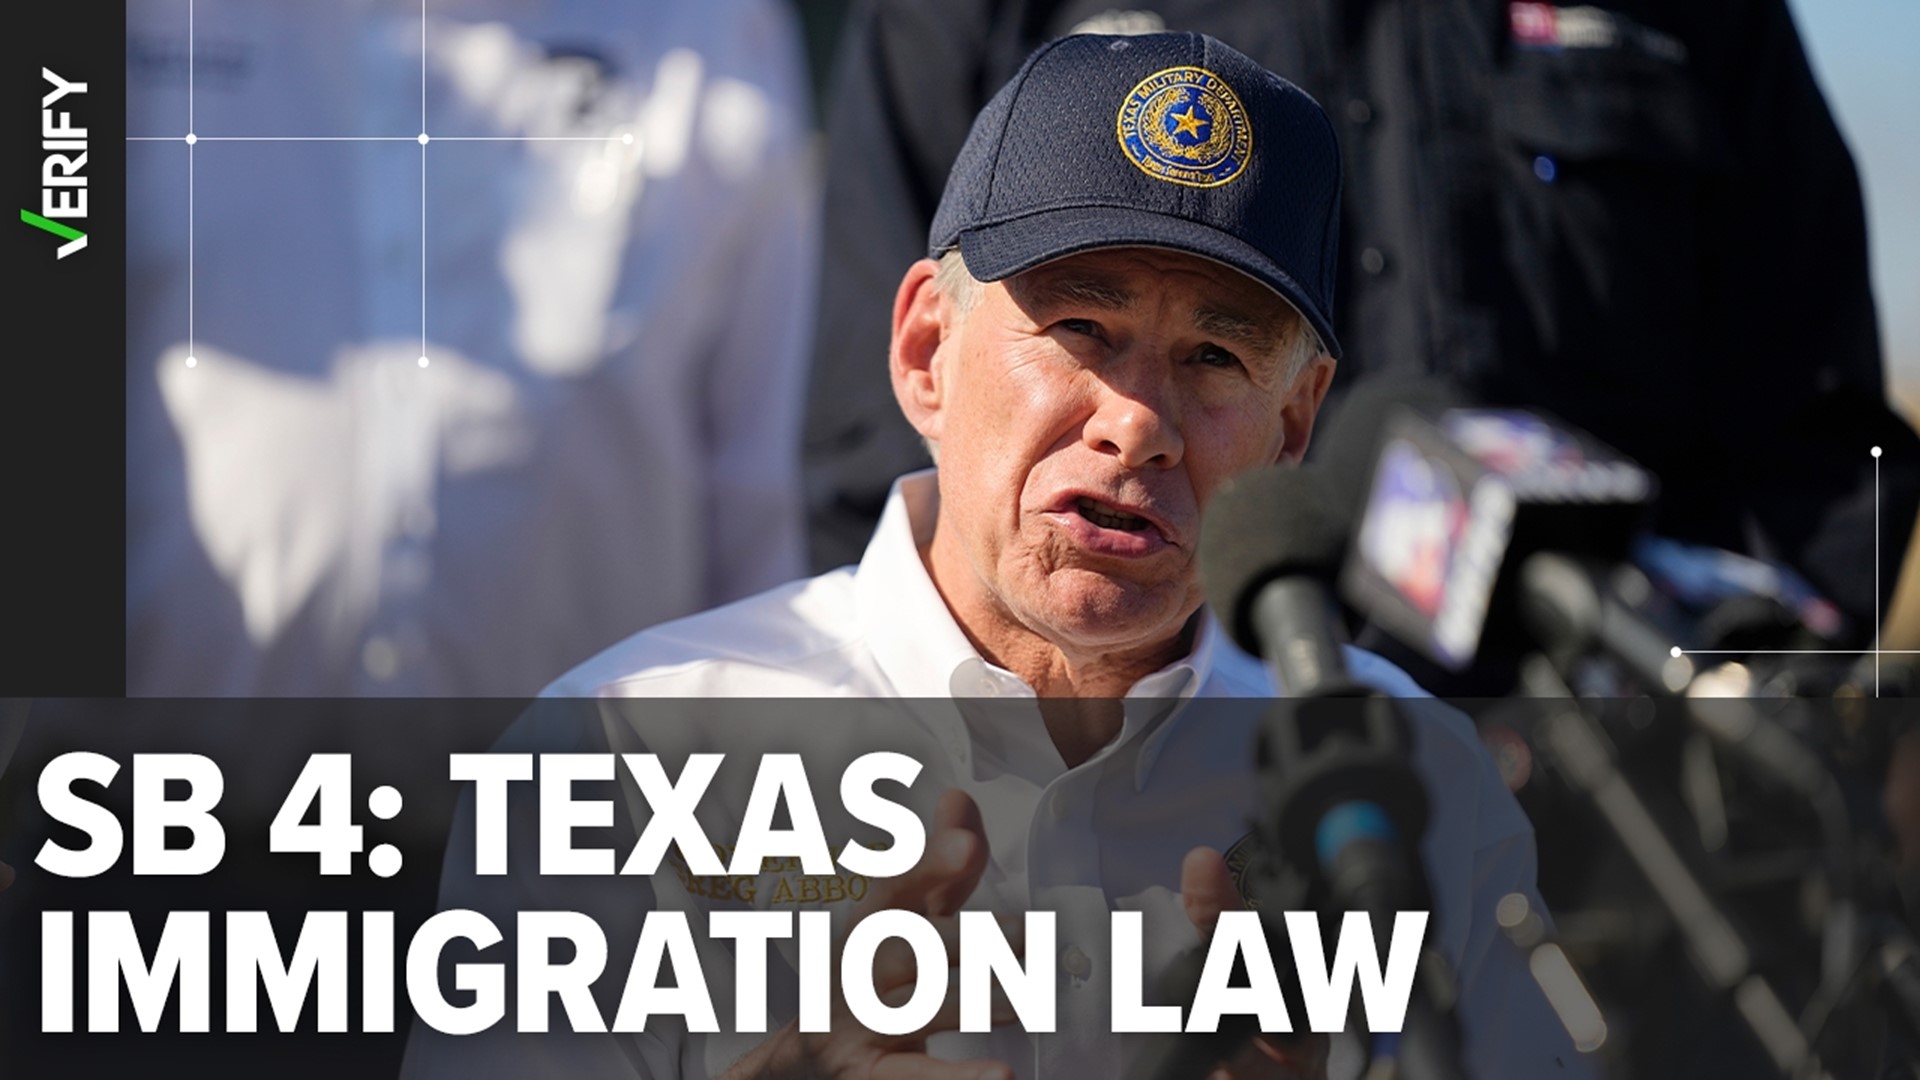 S.B. 4 makes it a state crime to cross into Texas at any place other than a lawful port of entry. Police could arrest migrants who have entered illegally.